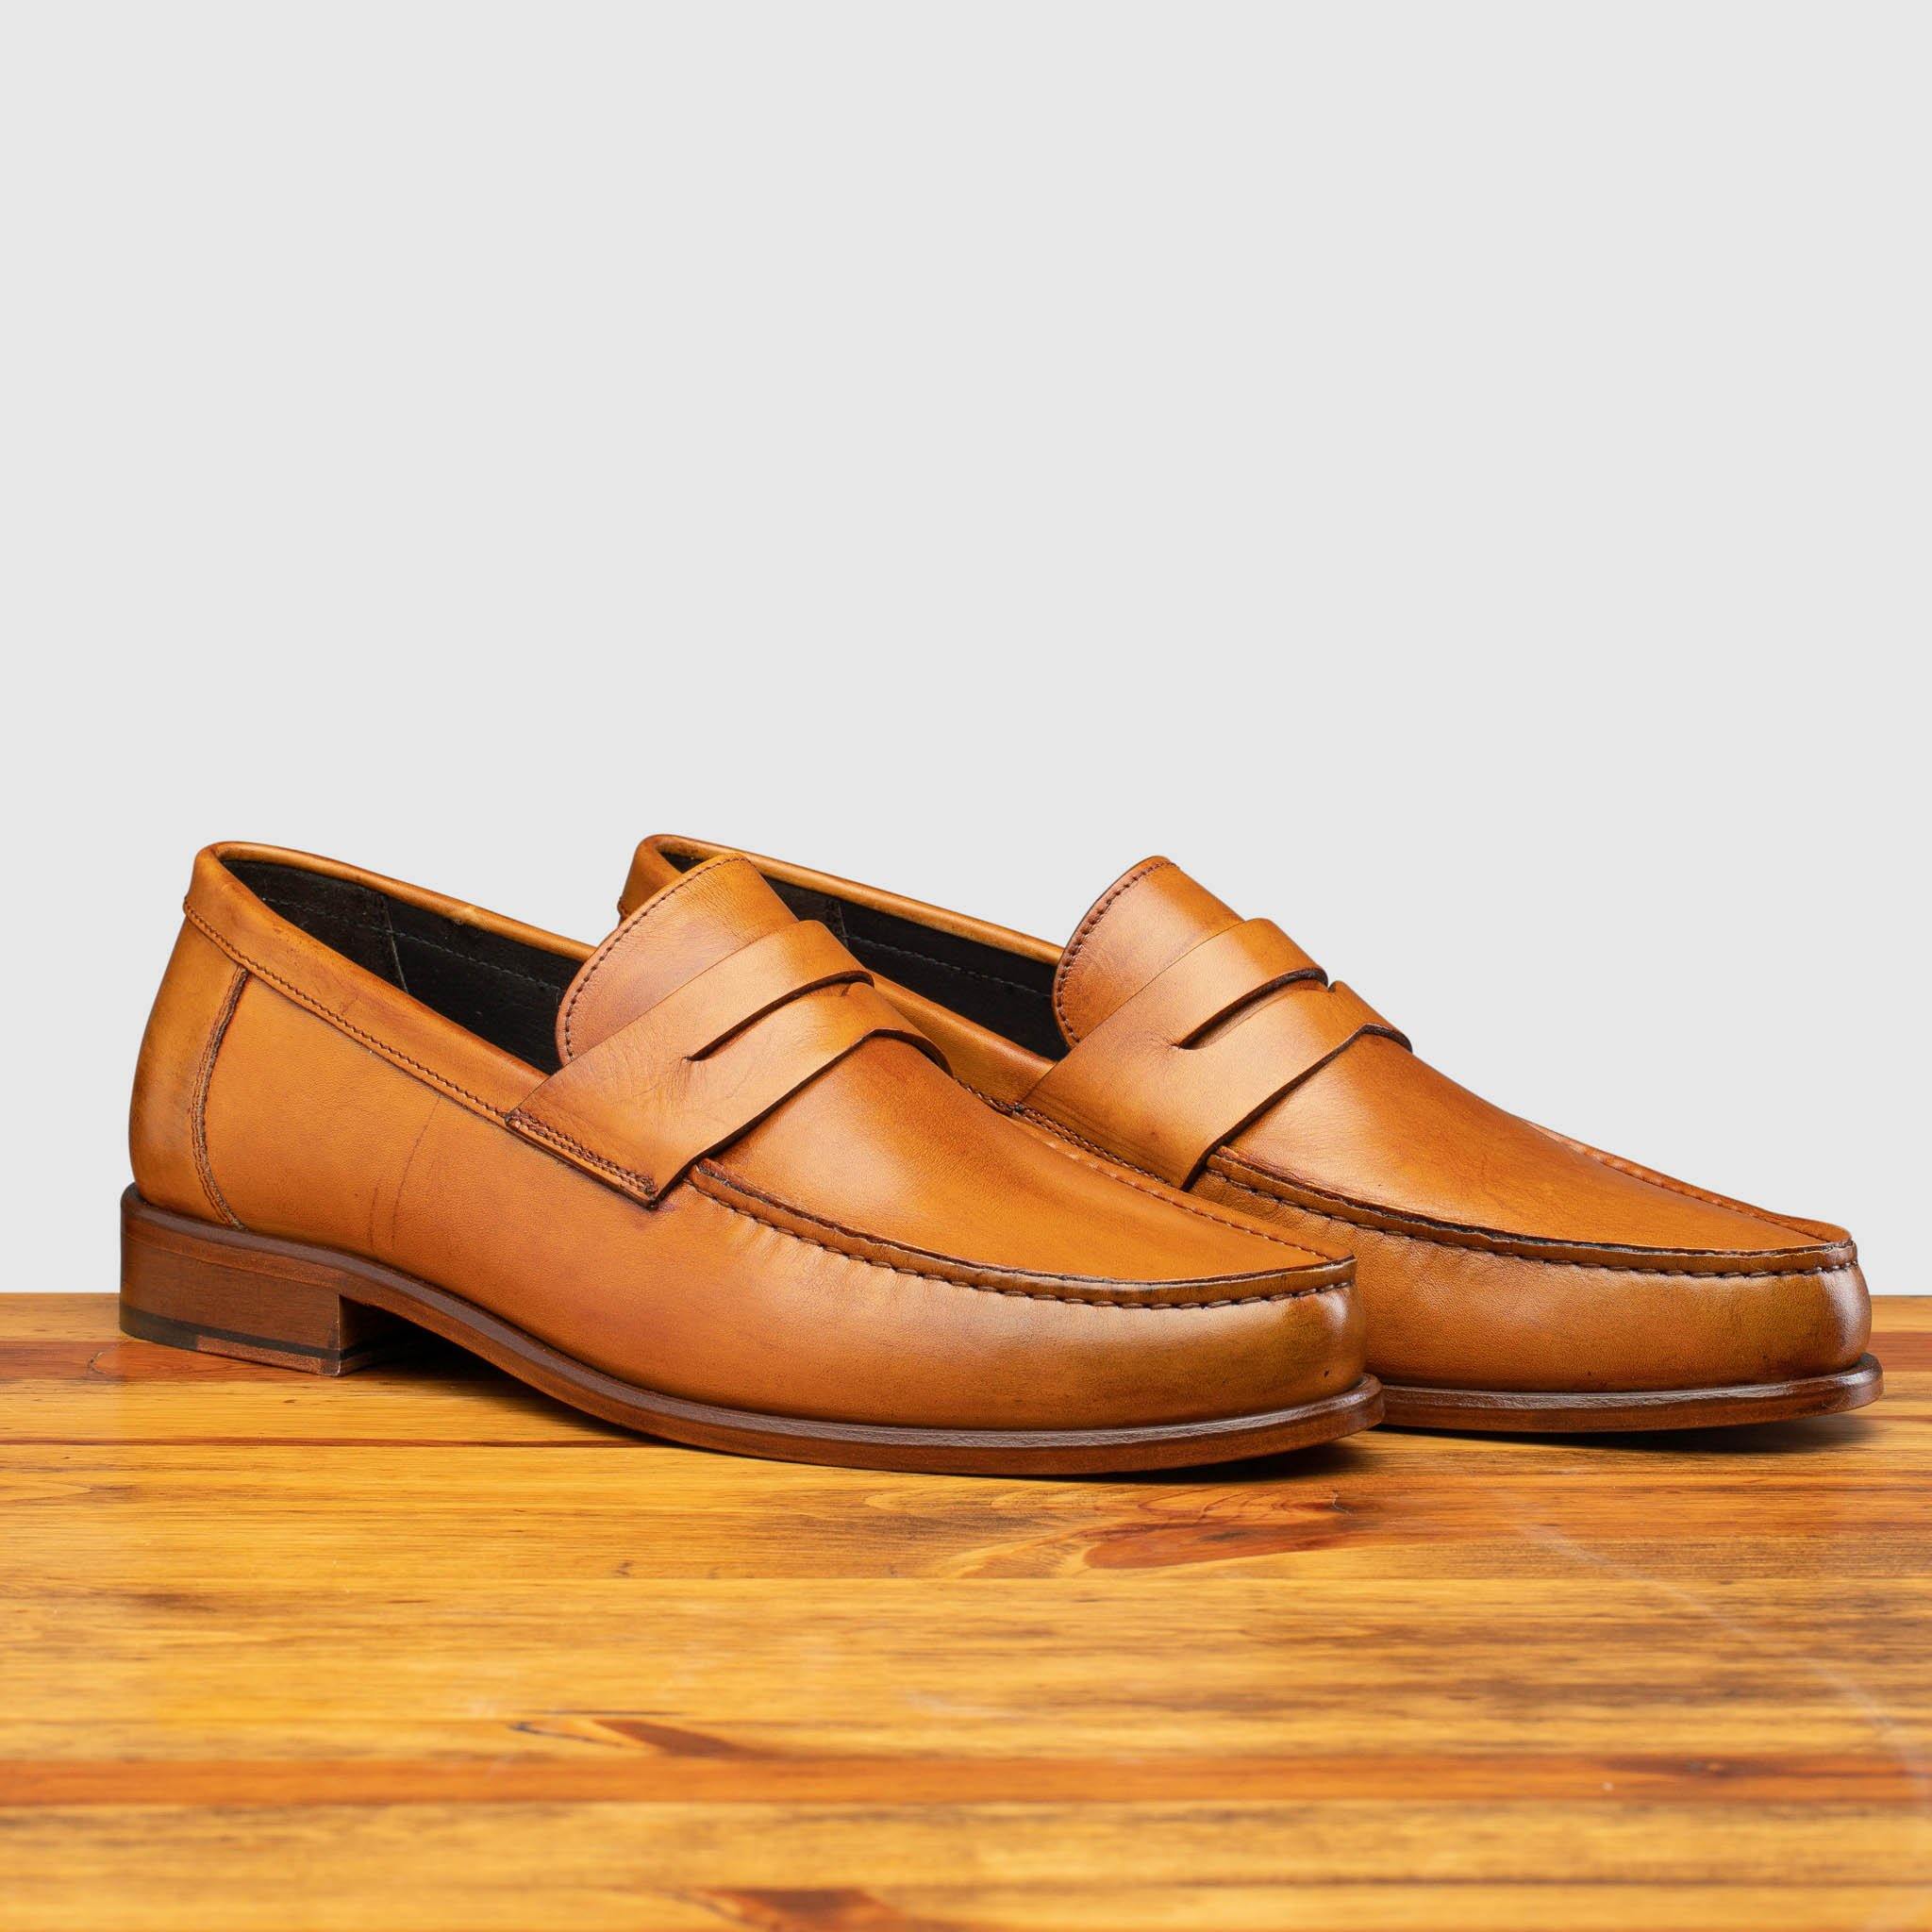 Pair of Calzoleria Toscana Santor Collegiate Loafer in Dark Caramel on top of a wooden table